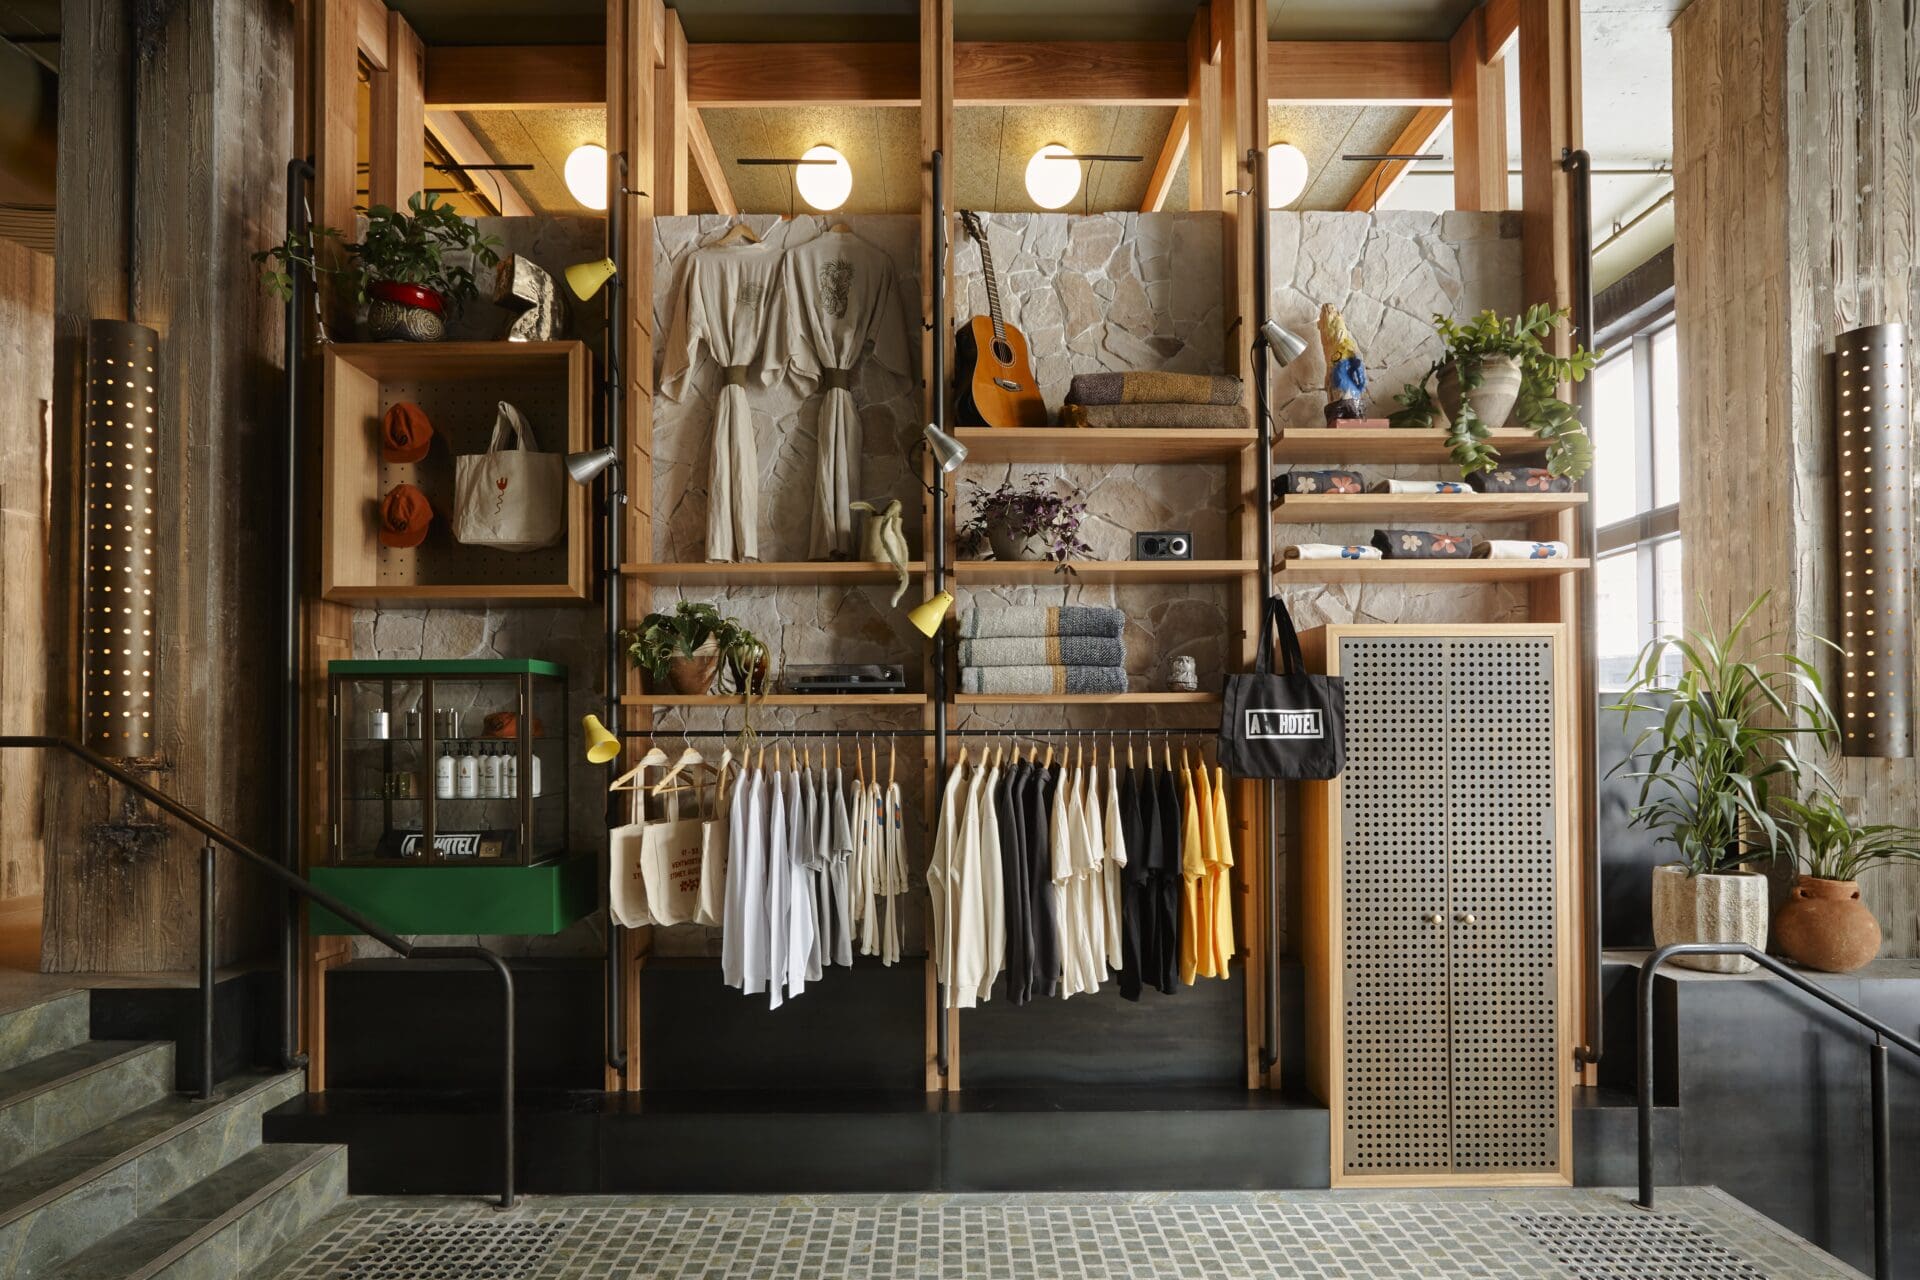 The retail offering at Ace Hotel, Sydney